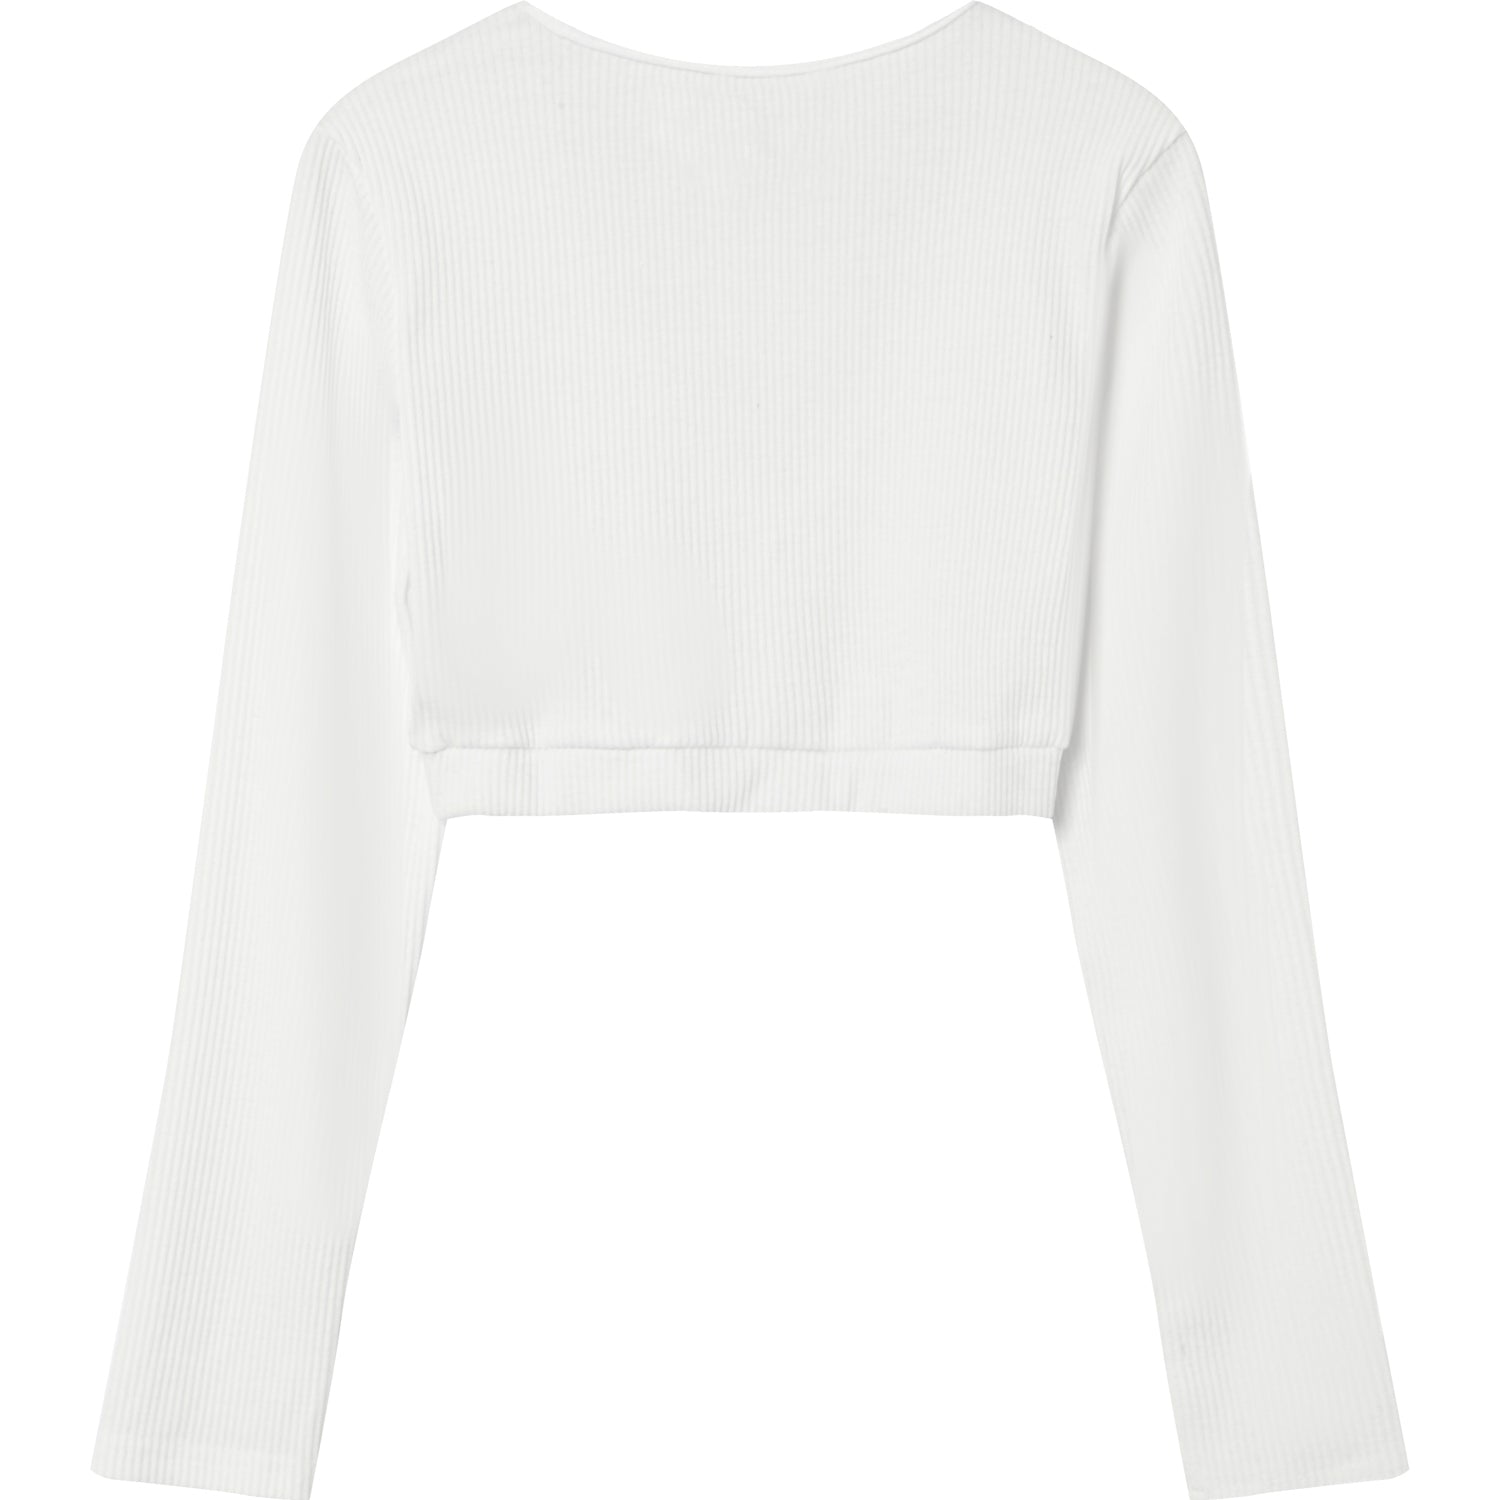 Cropped top long sleeves White